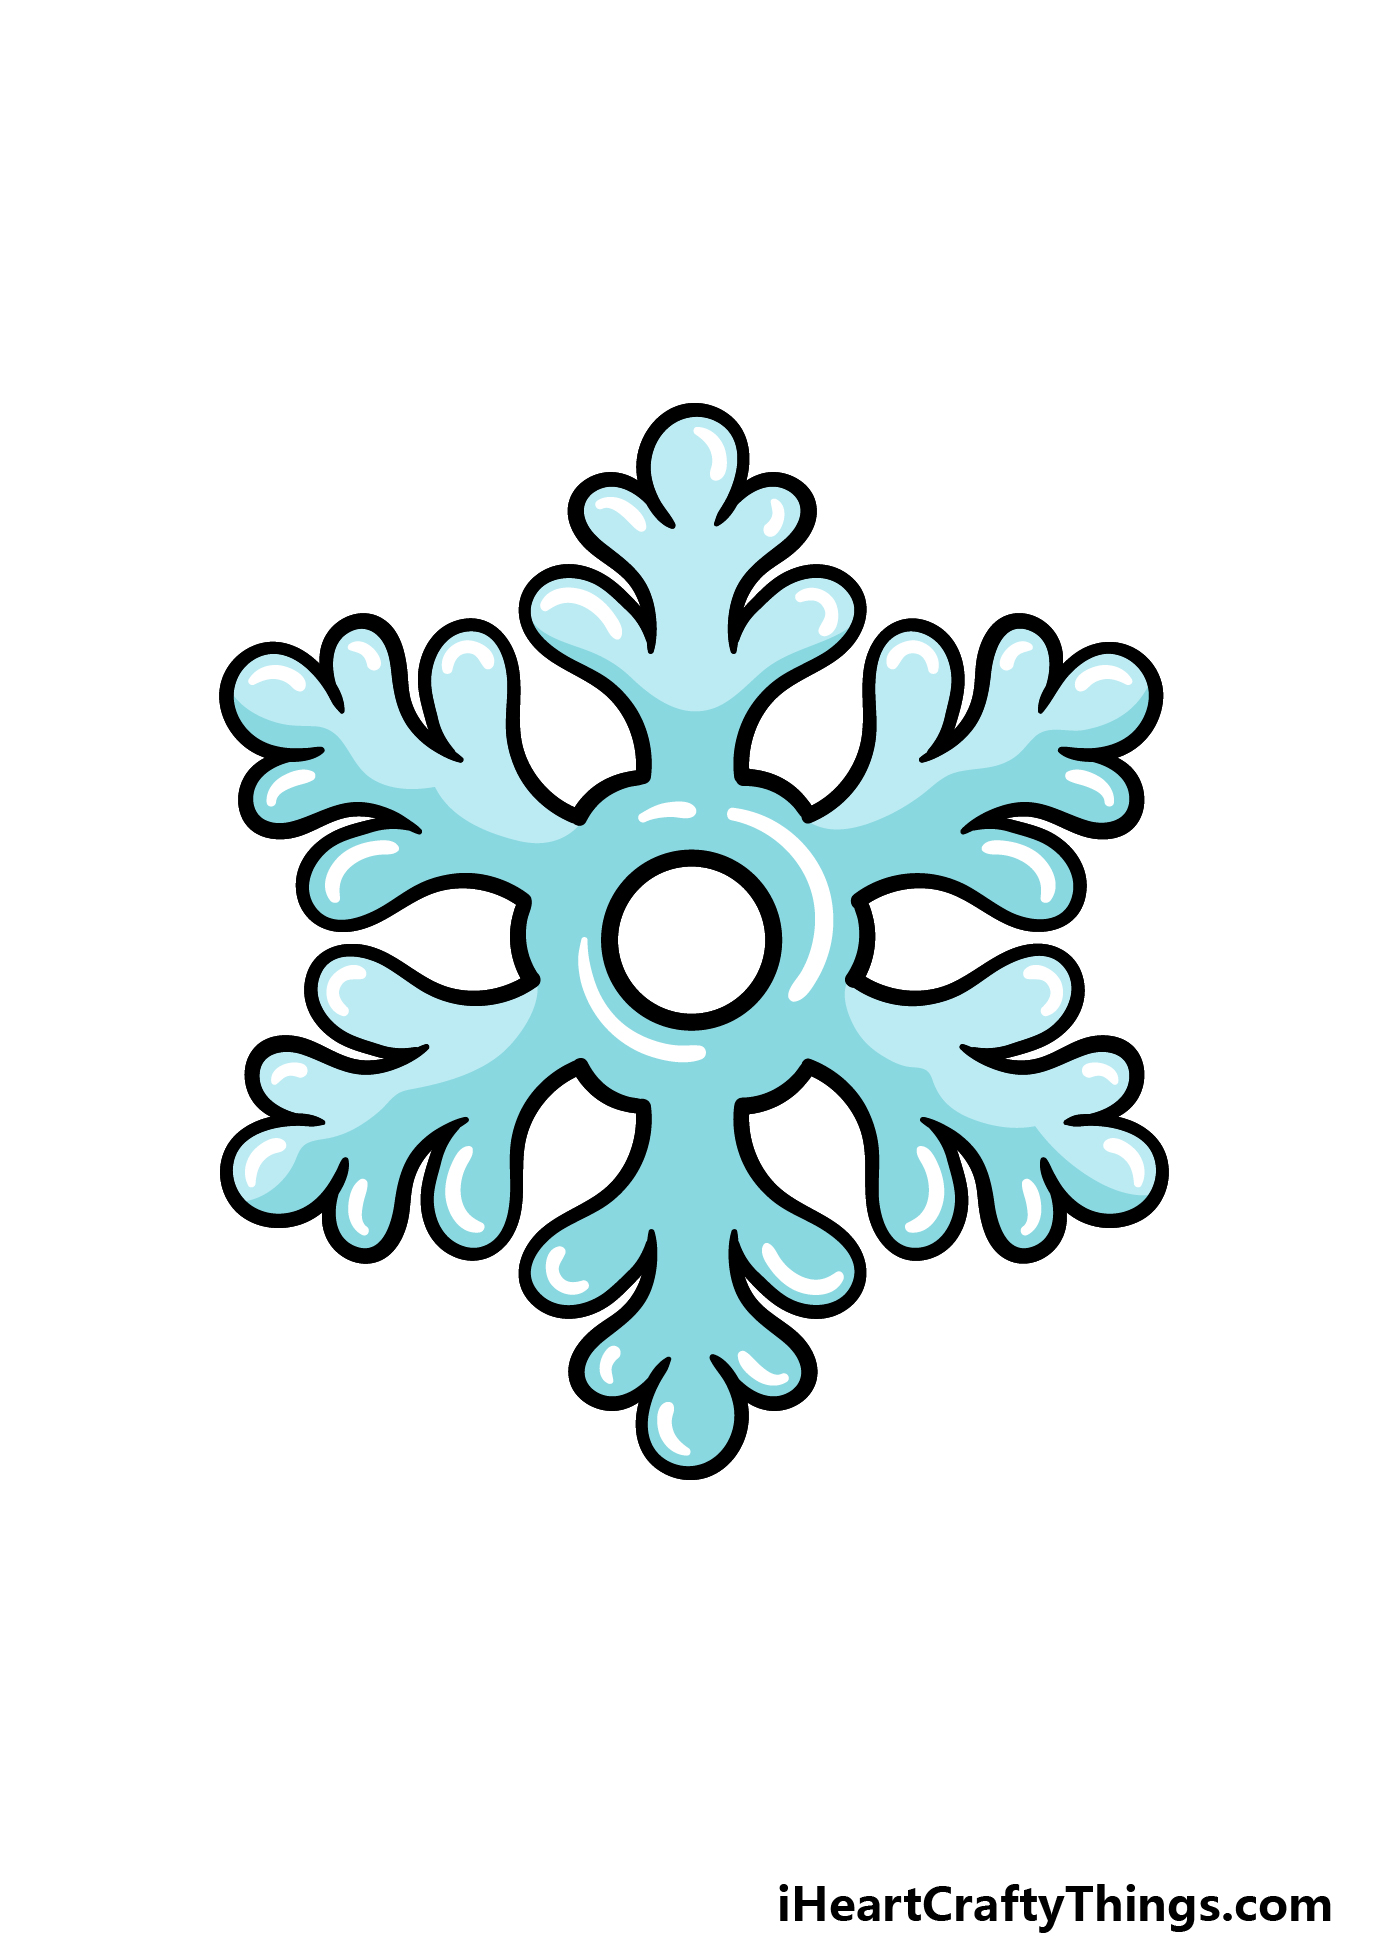 Cartoon Snowflake Drawing - How To Draw A Cartoon Snowflake Step By Step